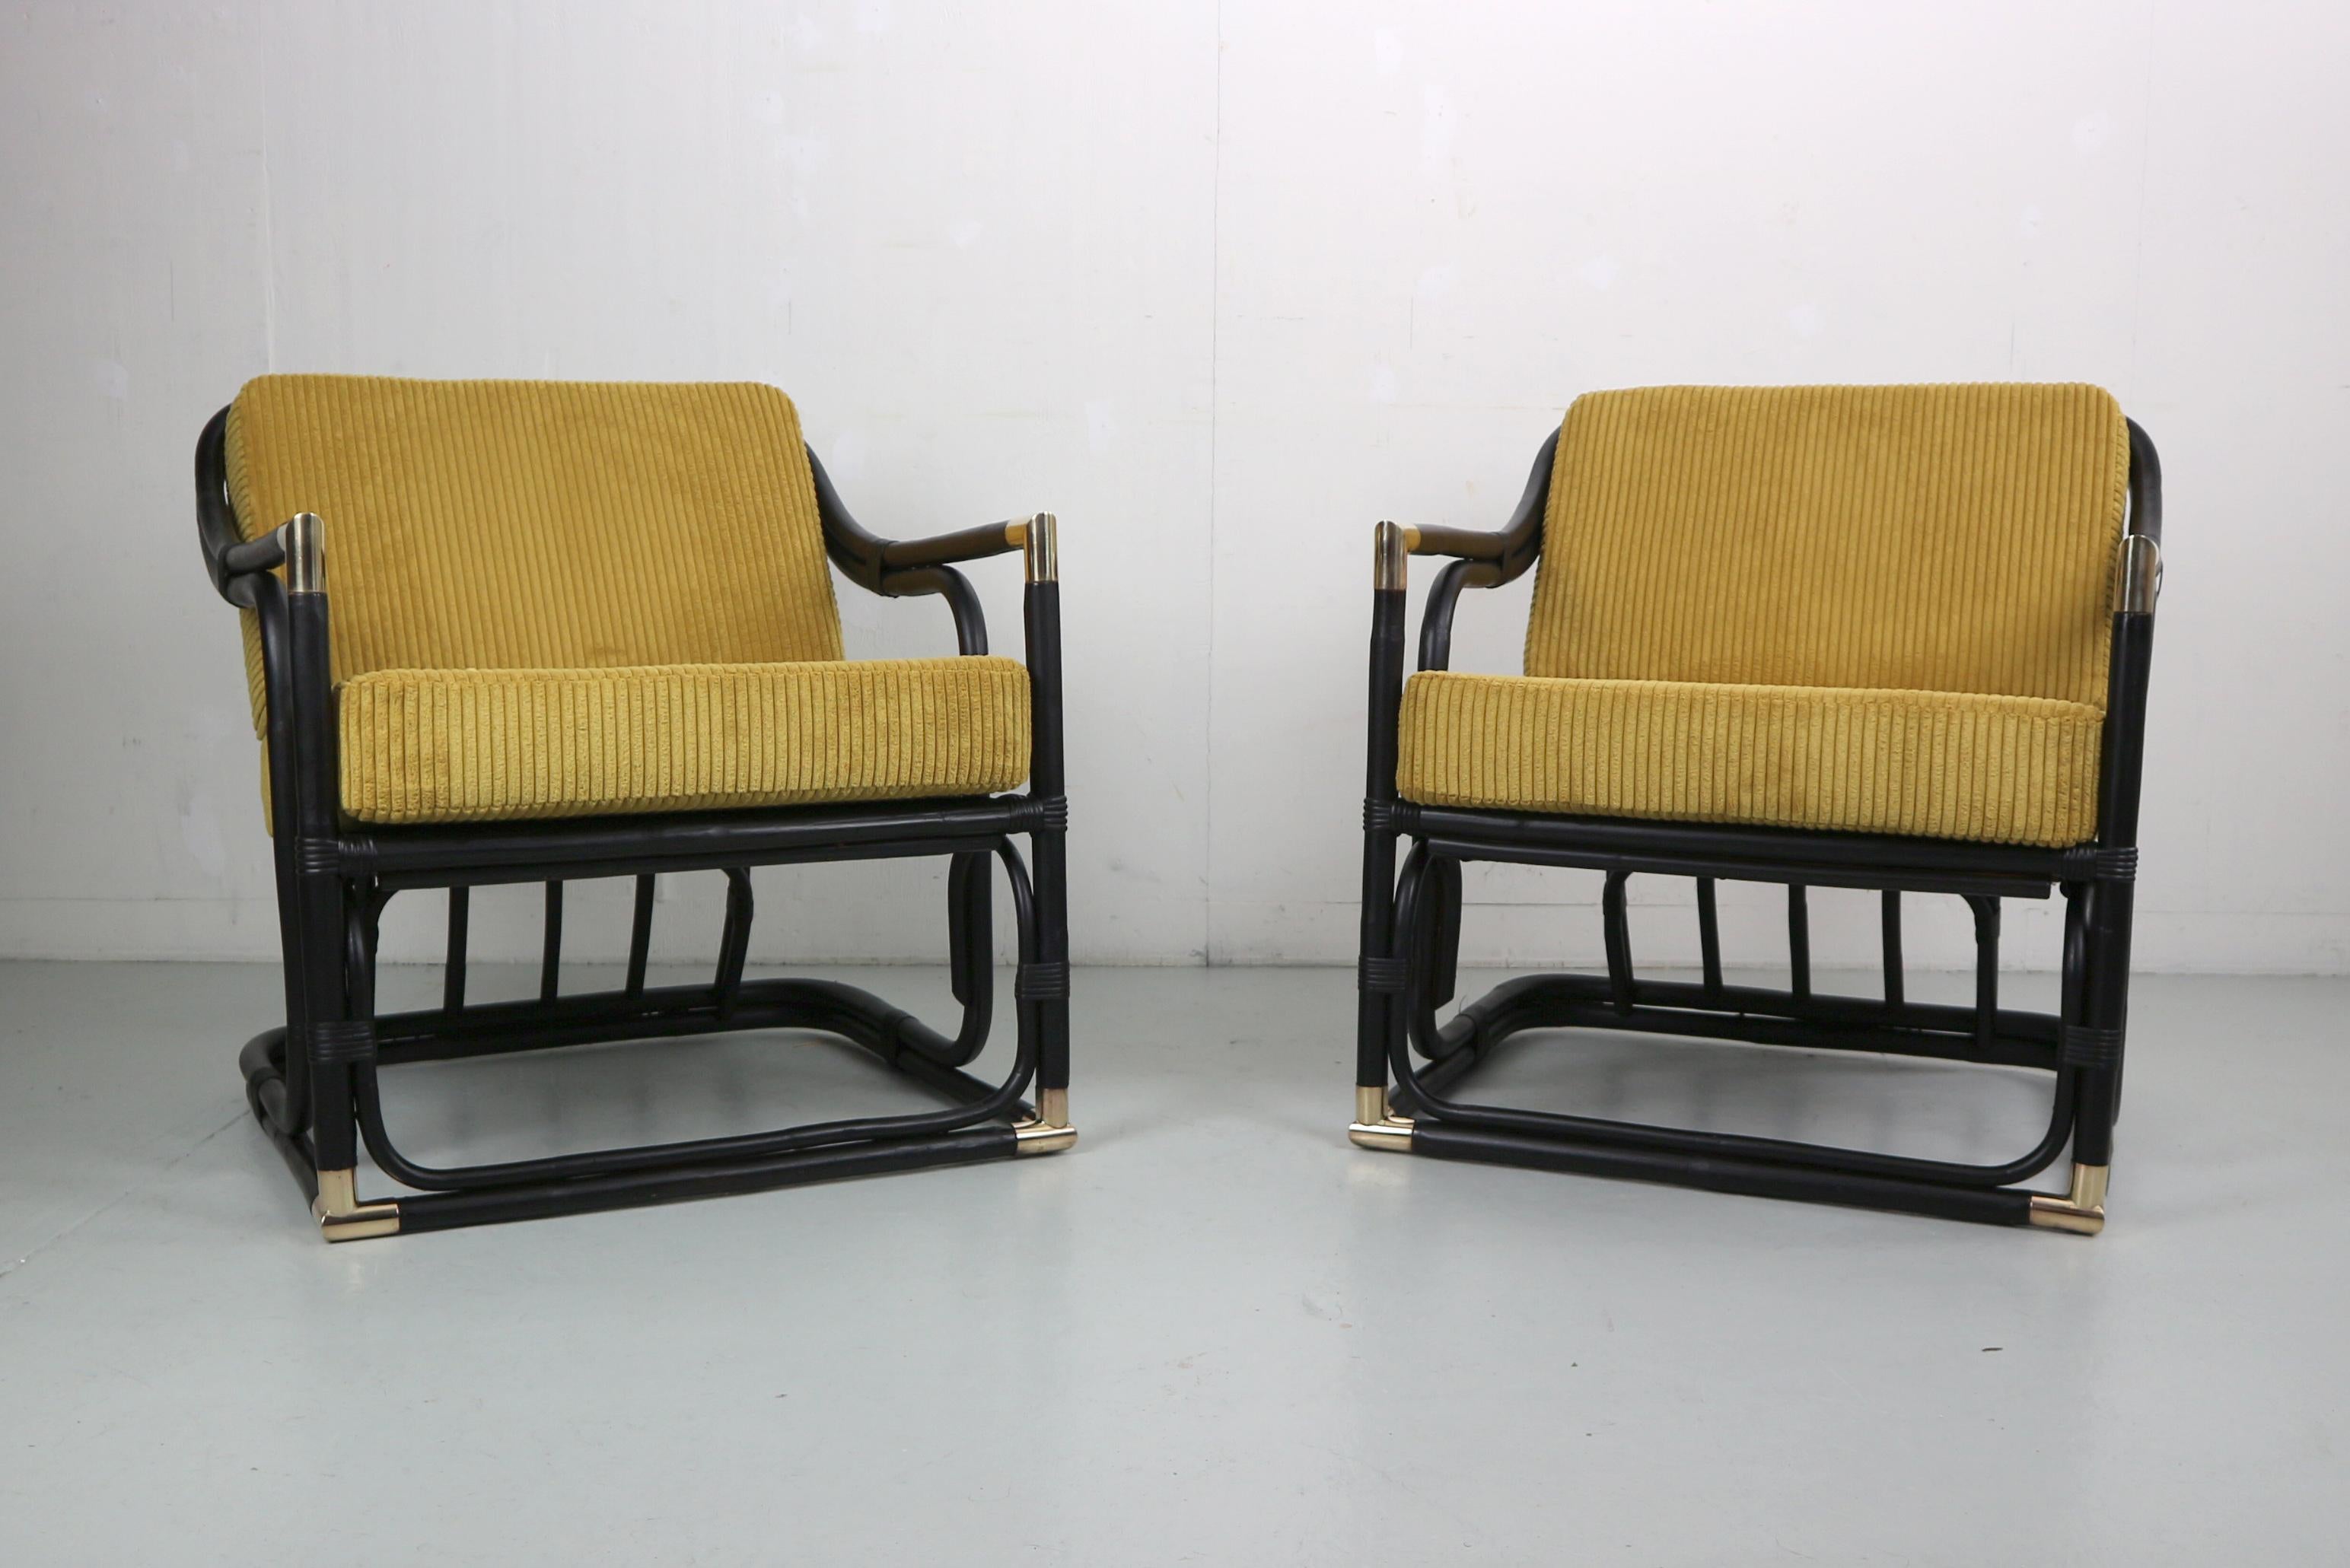 A pair of absolutely stunning In this listing you will find a pair of absolutely stunning Early 20th Century bamboo and rattan loungers. Their stunning design makes these loungers a real eye candy for all design lovers. Made in France

Frame has